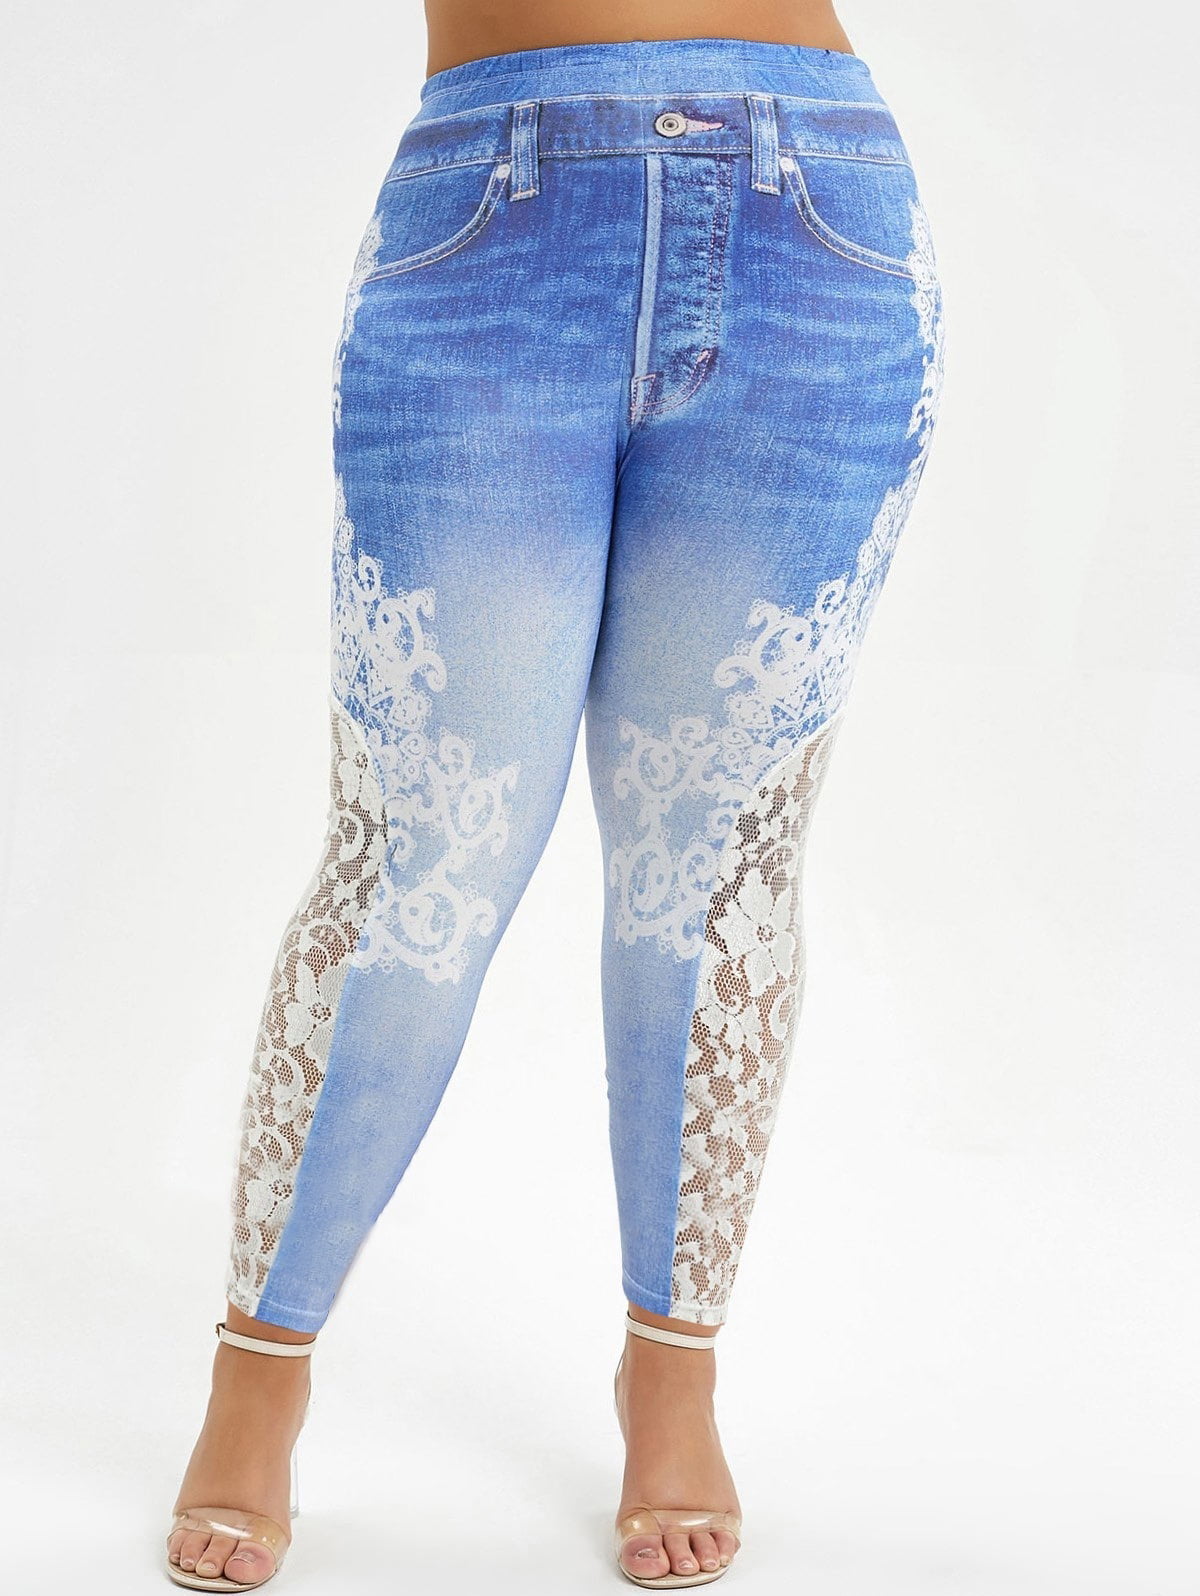 Women's Embroidered Ankle Skinny Denim Jeans XS/S/M/L/XL 